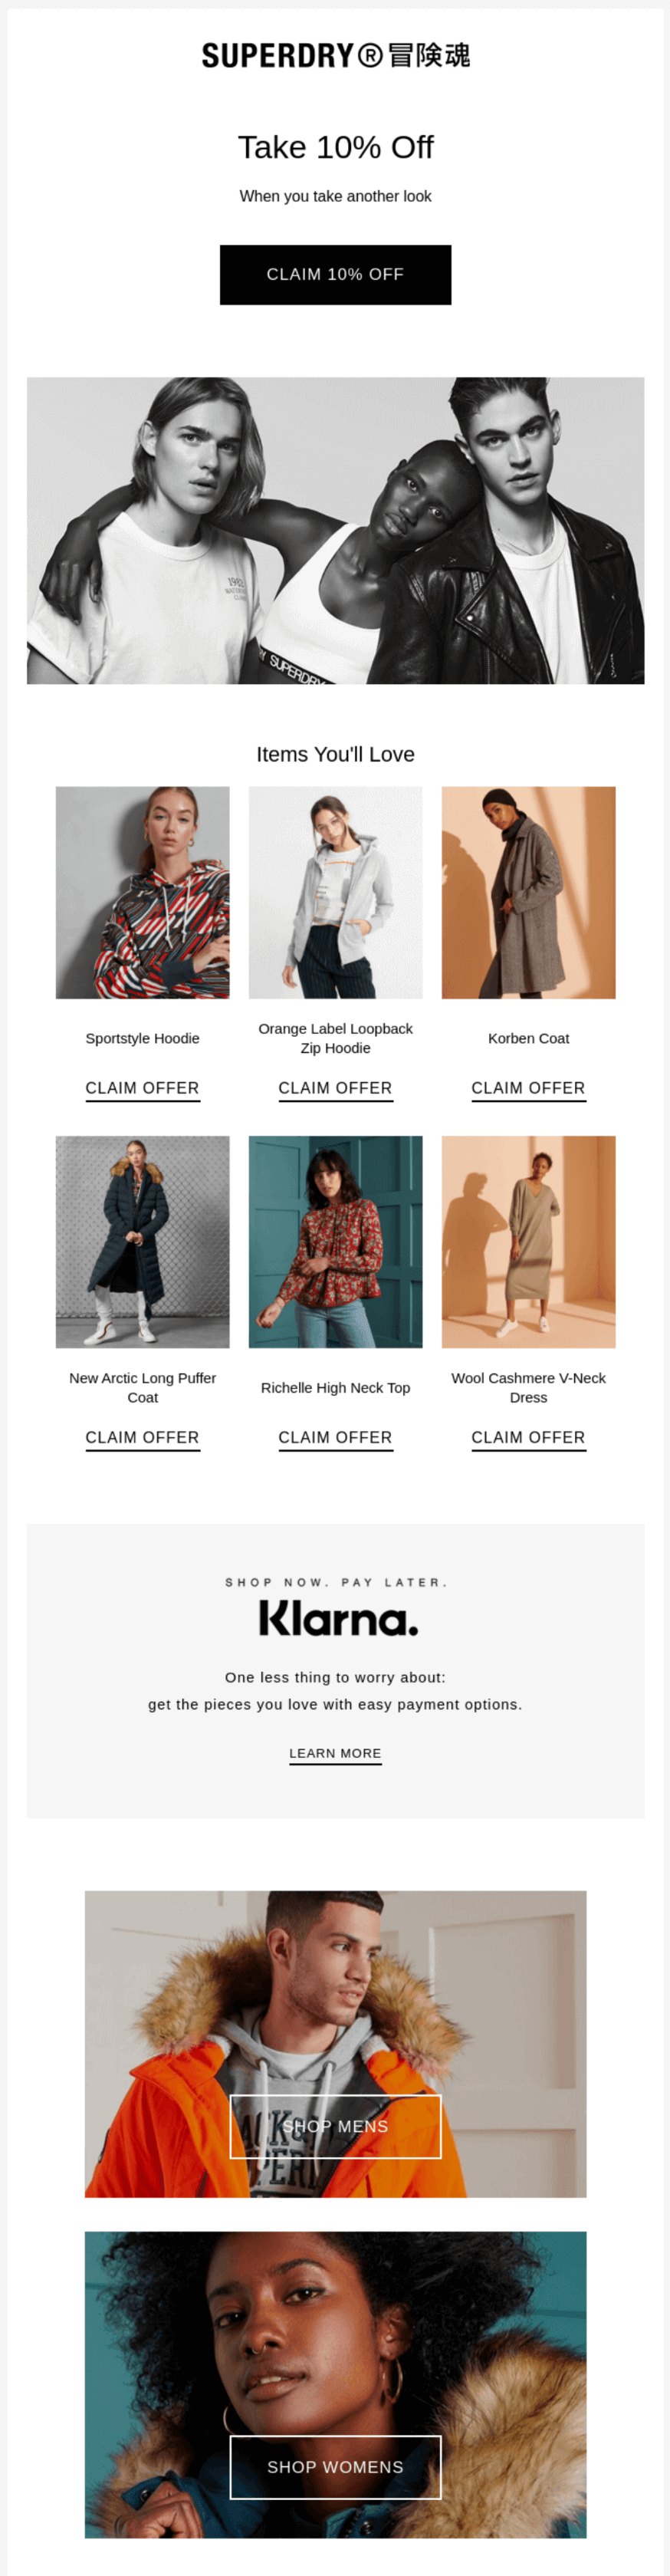 Sales email from Superdry